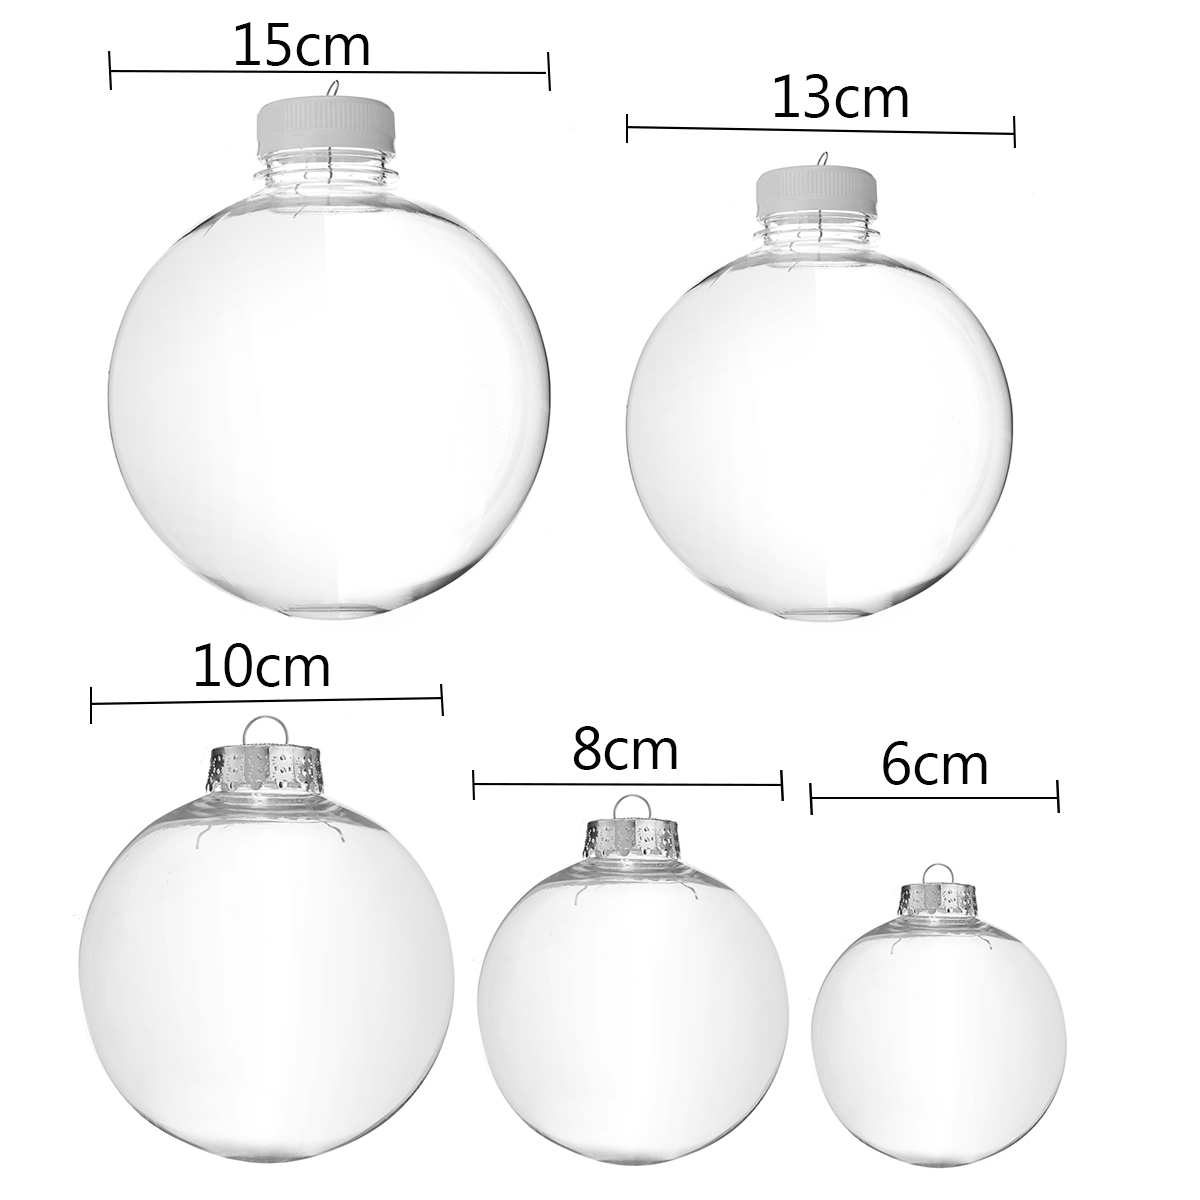 Super-Clear-Plastic-Balls-DIY-Christmas-Trees-Hanging-Bauble-Decoration-Toys-1210326-10